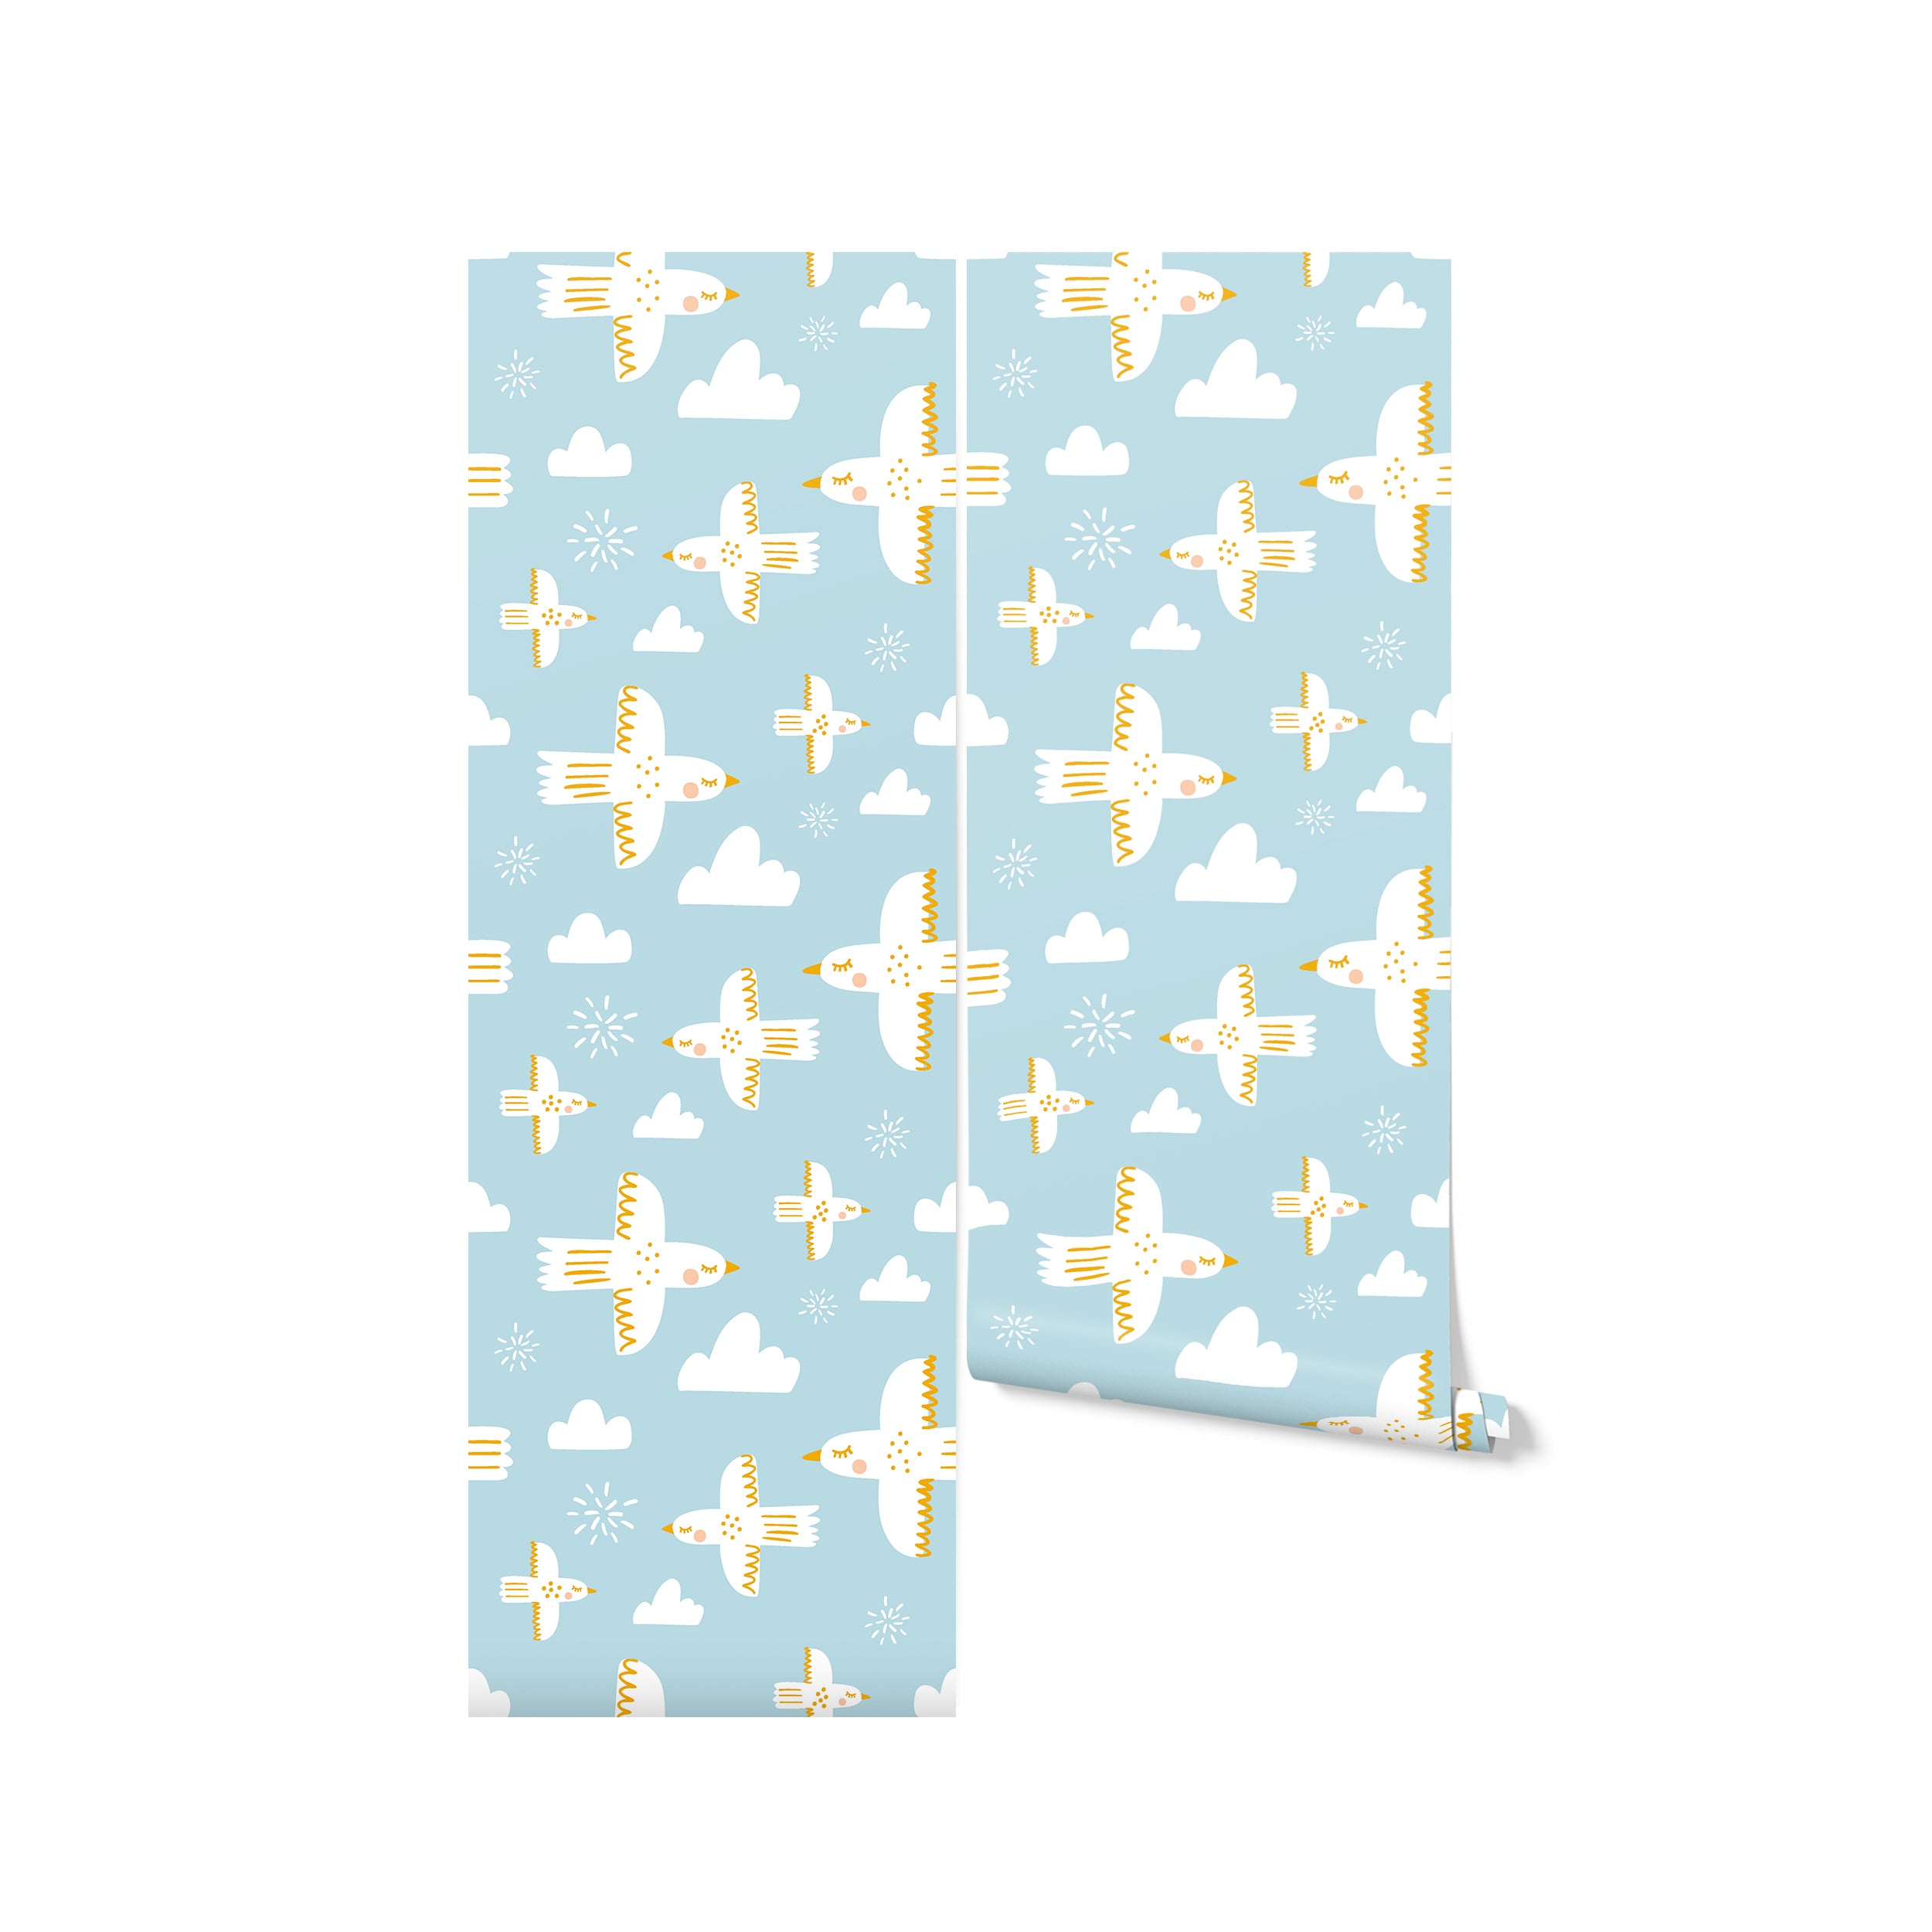 Charming wallpaper featuring a pattern of white birds in dynamic flight among clouds and scattered stars, set against a soft blue sky background, creating a sense of freedom and whimsy.